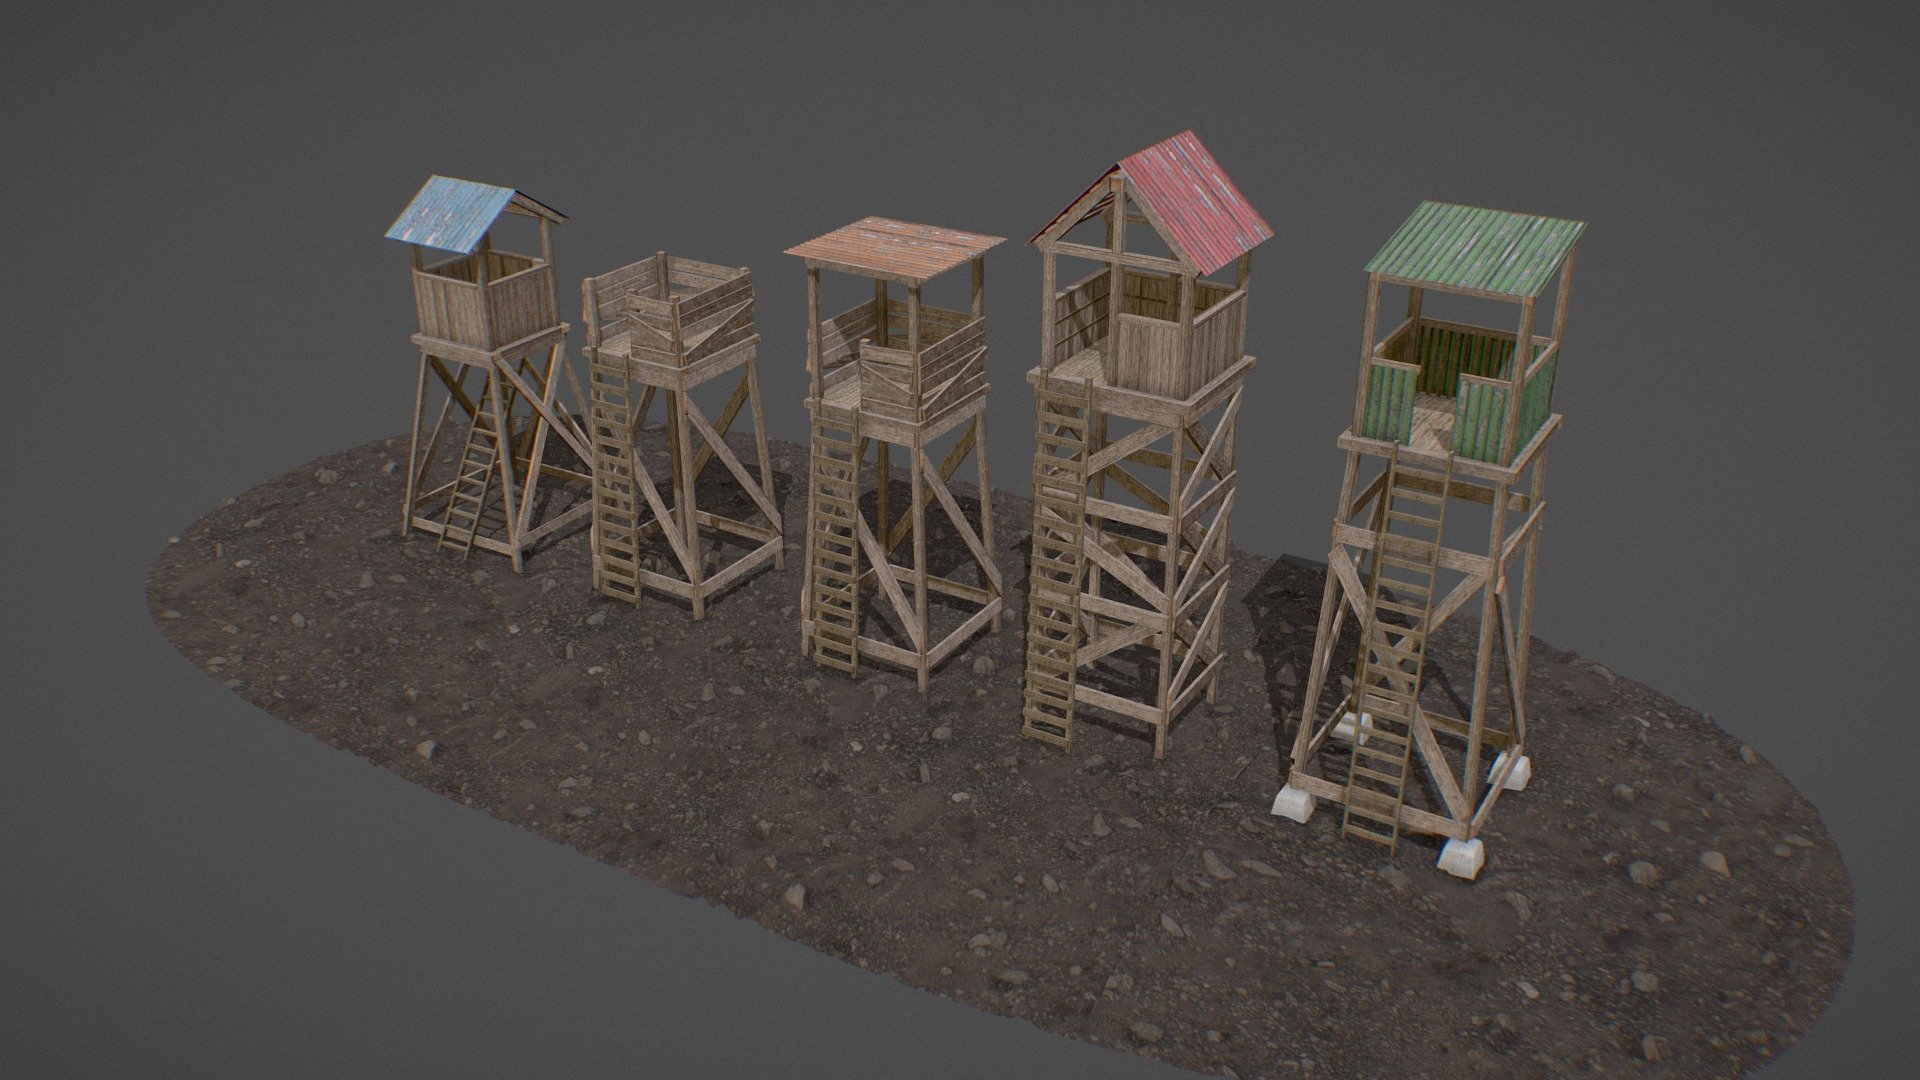 Do you need an outpost or watchtower for your game or project?

this pack contains five unique outposts optimized for Unity, Unreal, or any other game engine. 







Each model has:


∙Lightmap UV channels


∙less than 2100 tris each


∙Interchangable albedo maps for custom variation







A perfect fit especially for the survival/horror genre, or anywhere a derelict building of this fashion may be useful. You are provided a very easy to use, efficient, and customizable model ready for any purpose 3d model